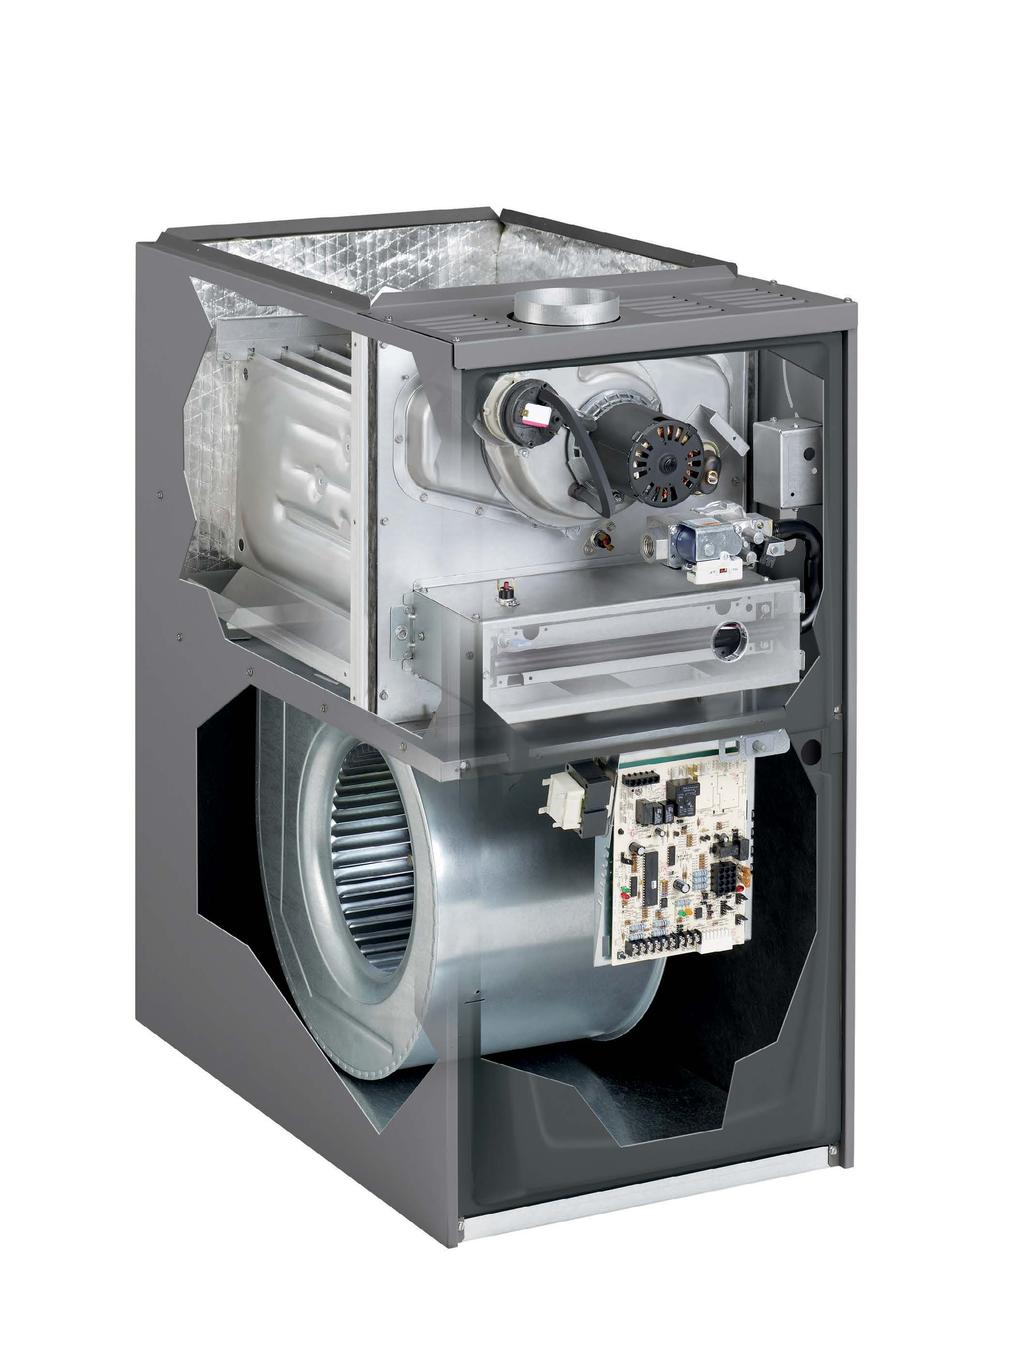 Furnace System Basics The most common type of system pairs an interior gas furnace with an exterior air conditioner.